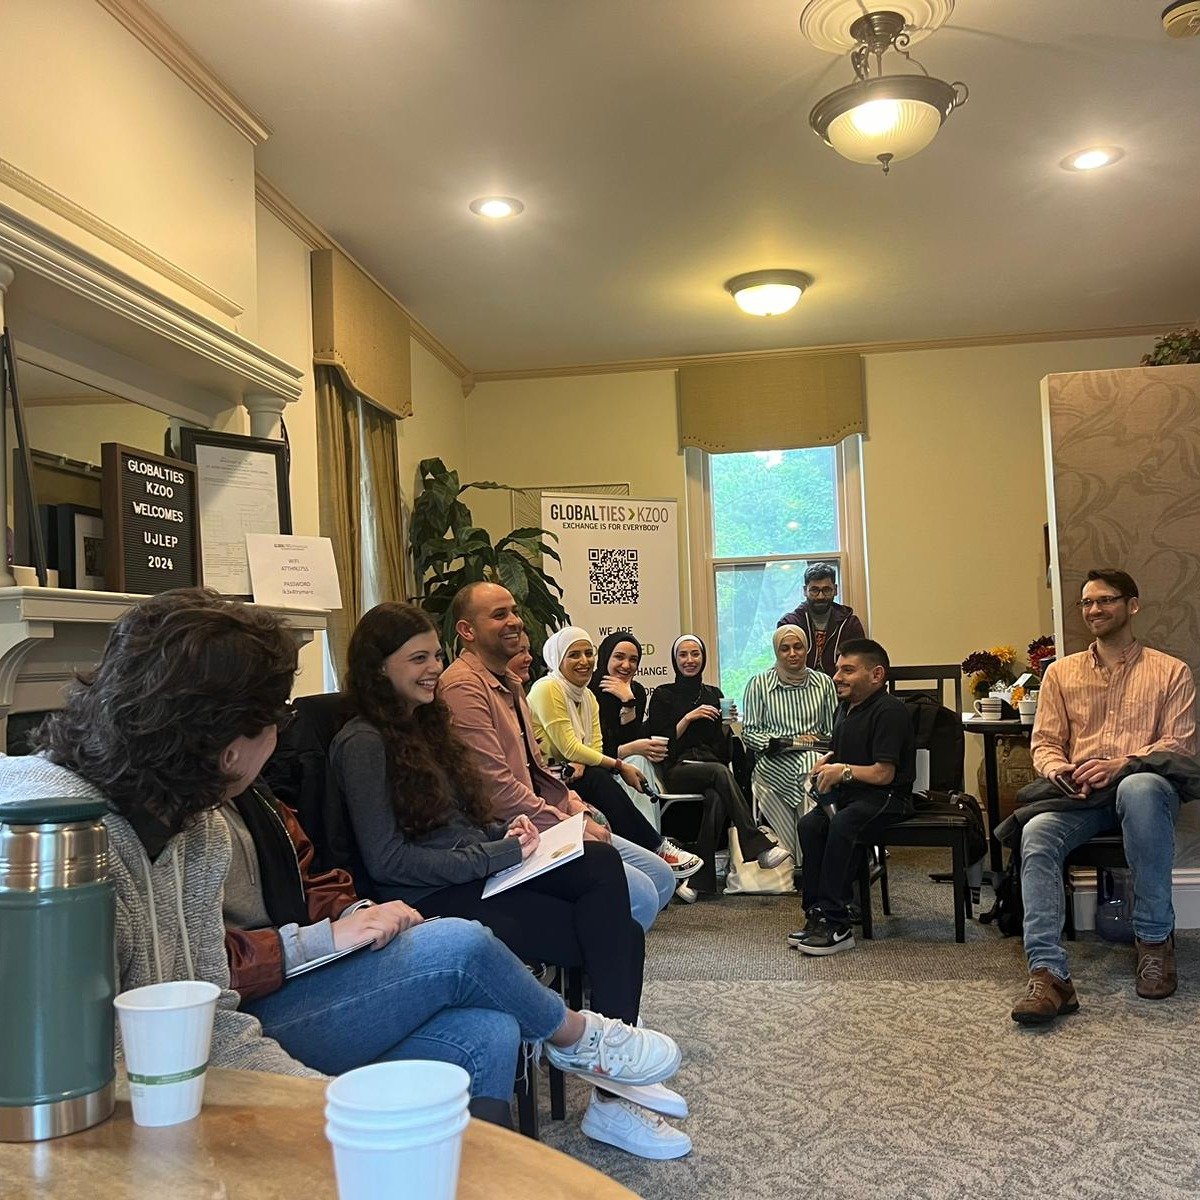 Thank you so much to all of our wonderful home hosts who stayed up late Friday night to welcome, direct from Jordan, Global Ties Kalamazoo's UJLEP cohort, implemented in partnership with IREX, and then rose early to join the GTKzoo team at our office